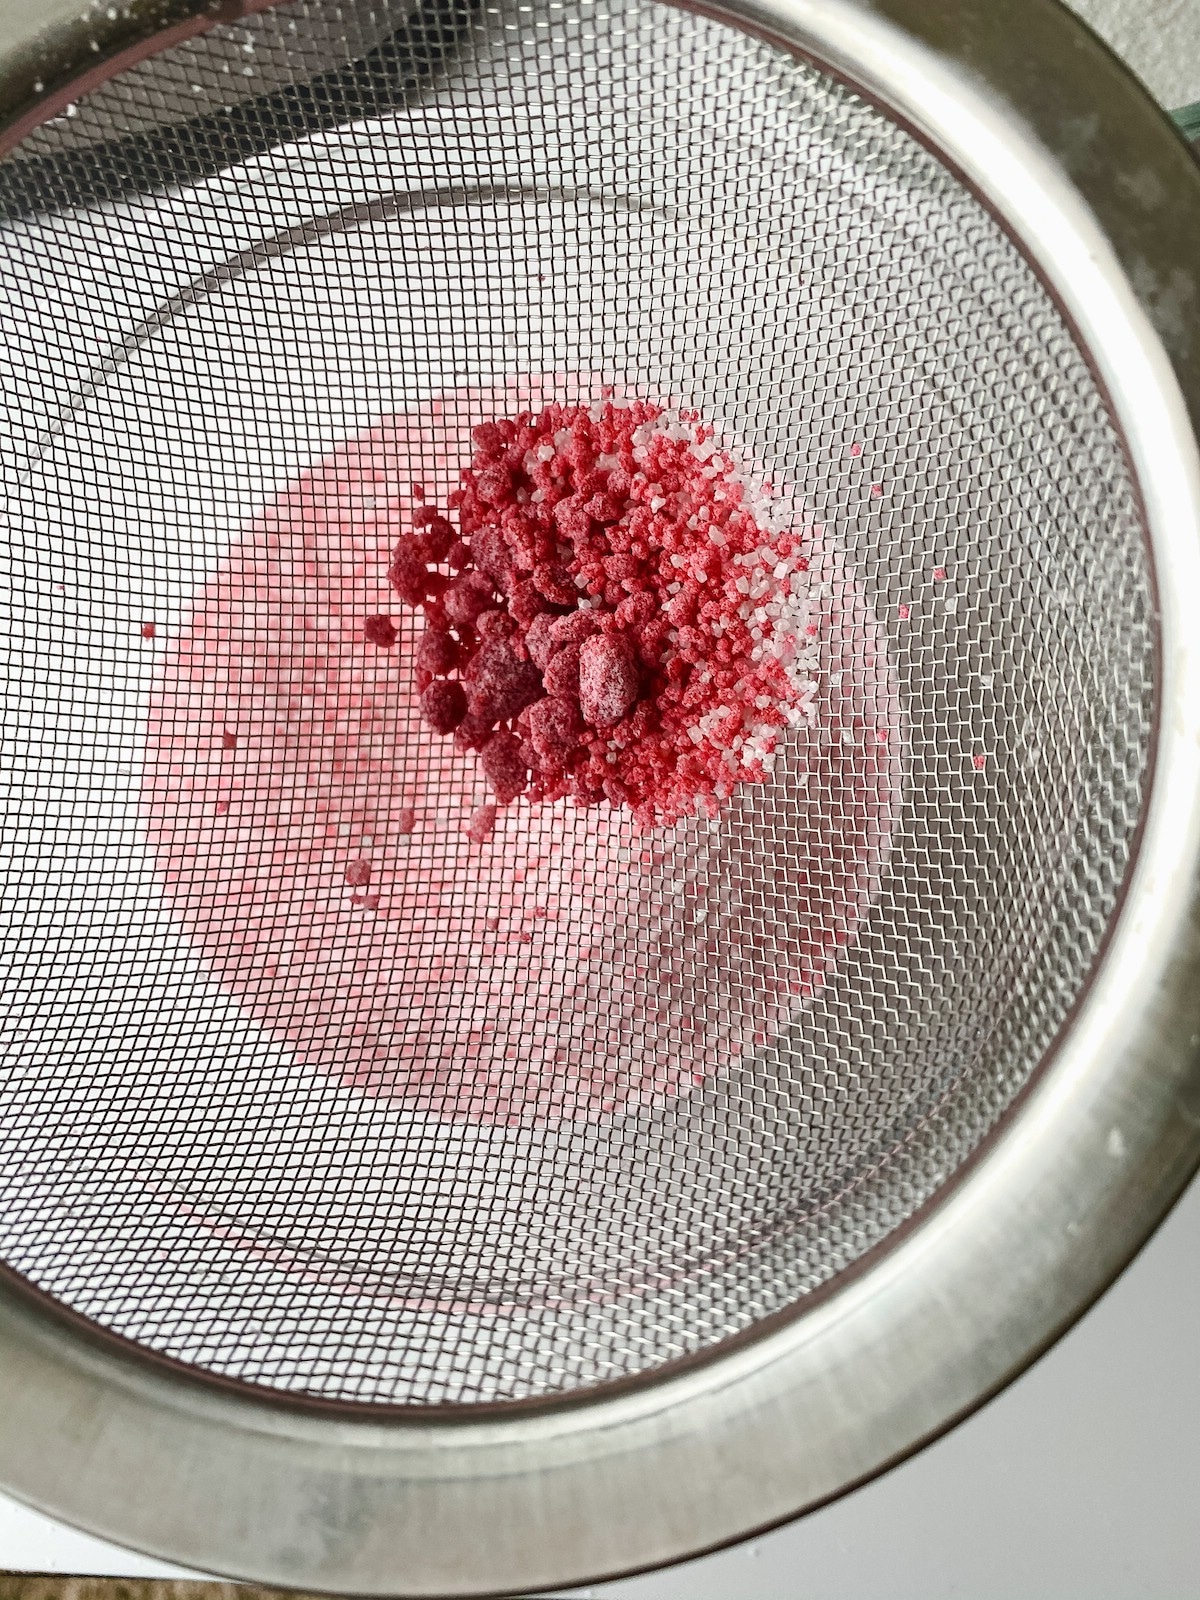 Sugar sifting through fine mesh strainer to remove clumps